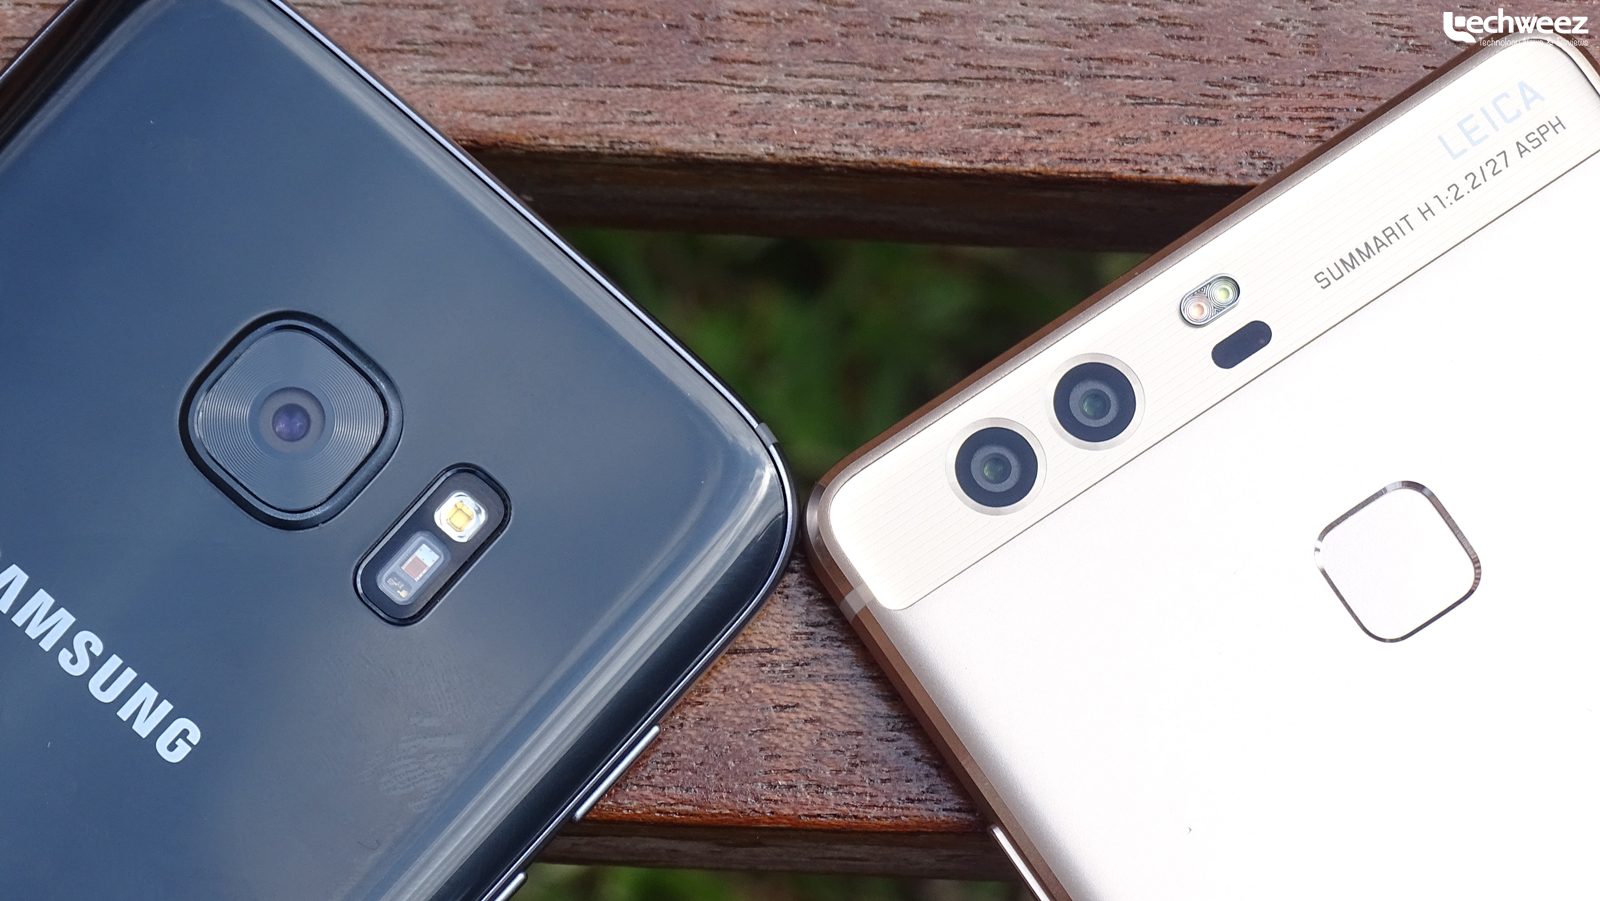 Samsung and Huawei's flagship smartphones, the Galaxy S7 and the P9, were instrumental in the two companies' fortunes in Q2 2016